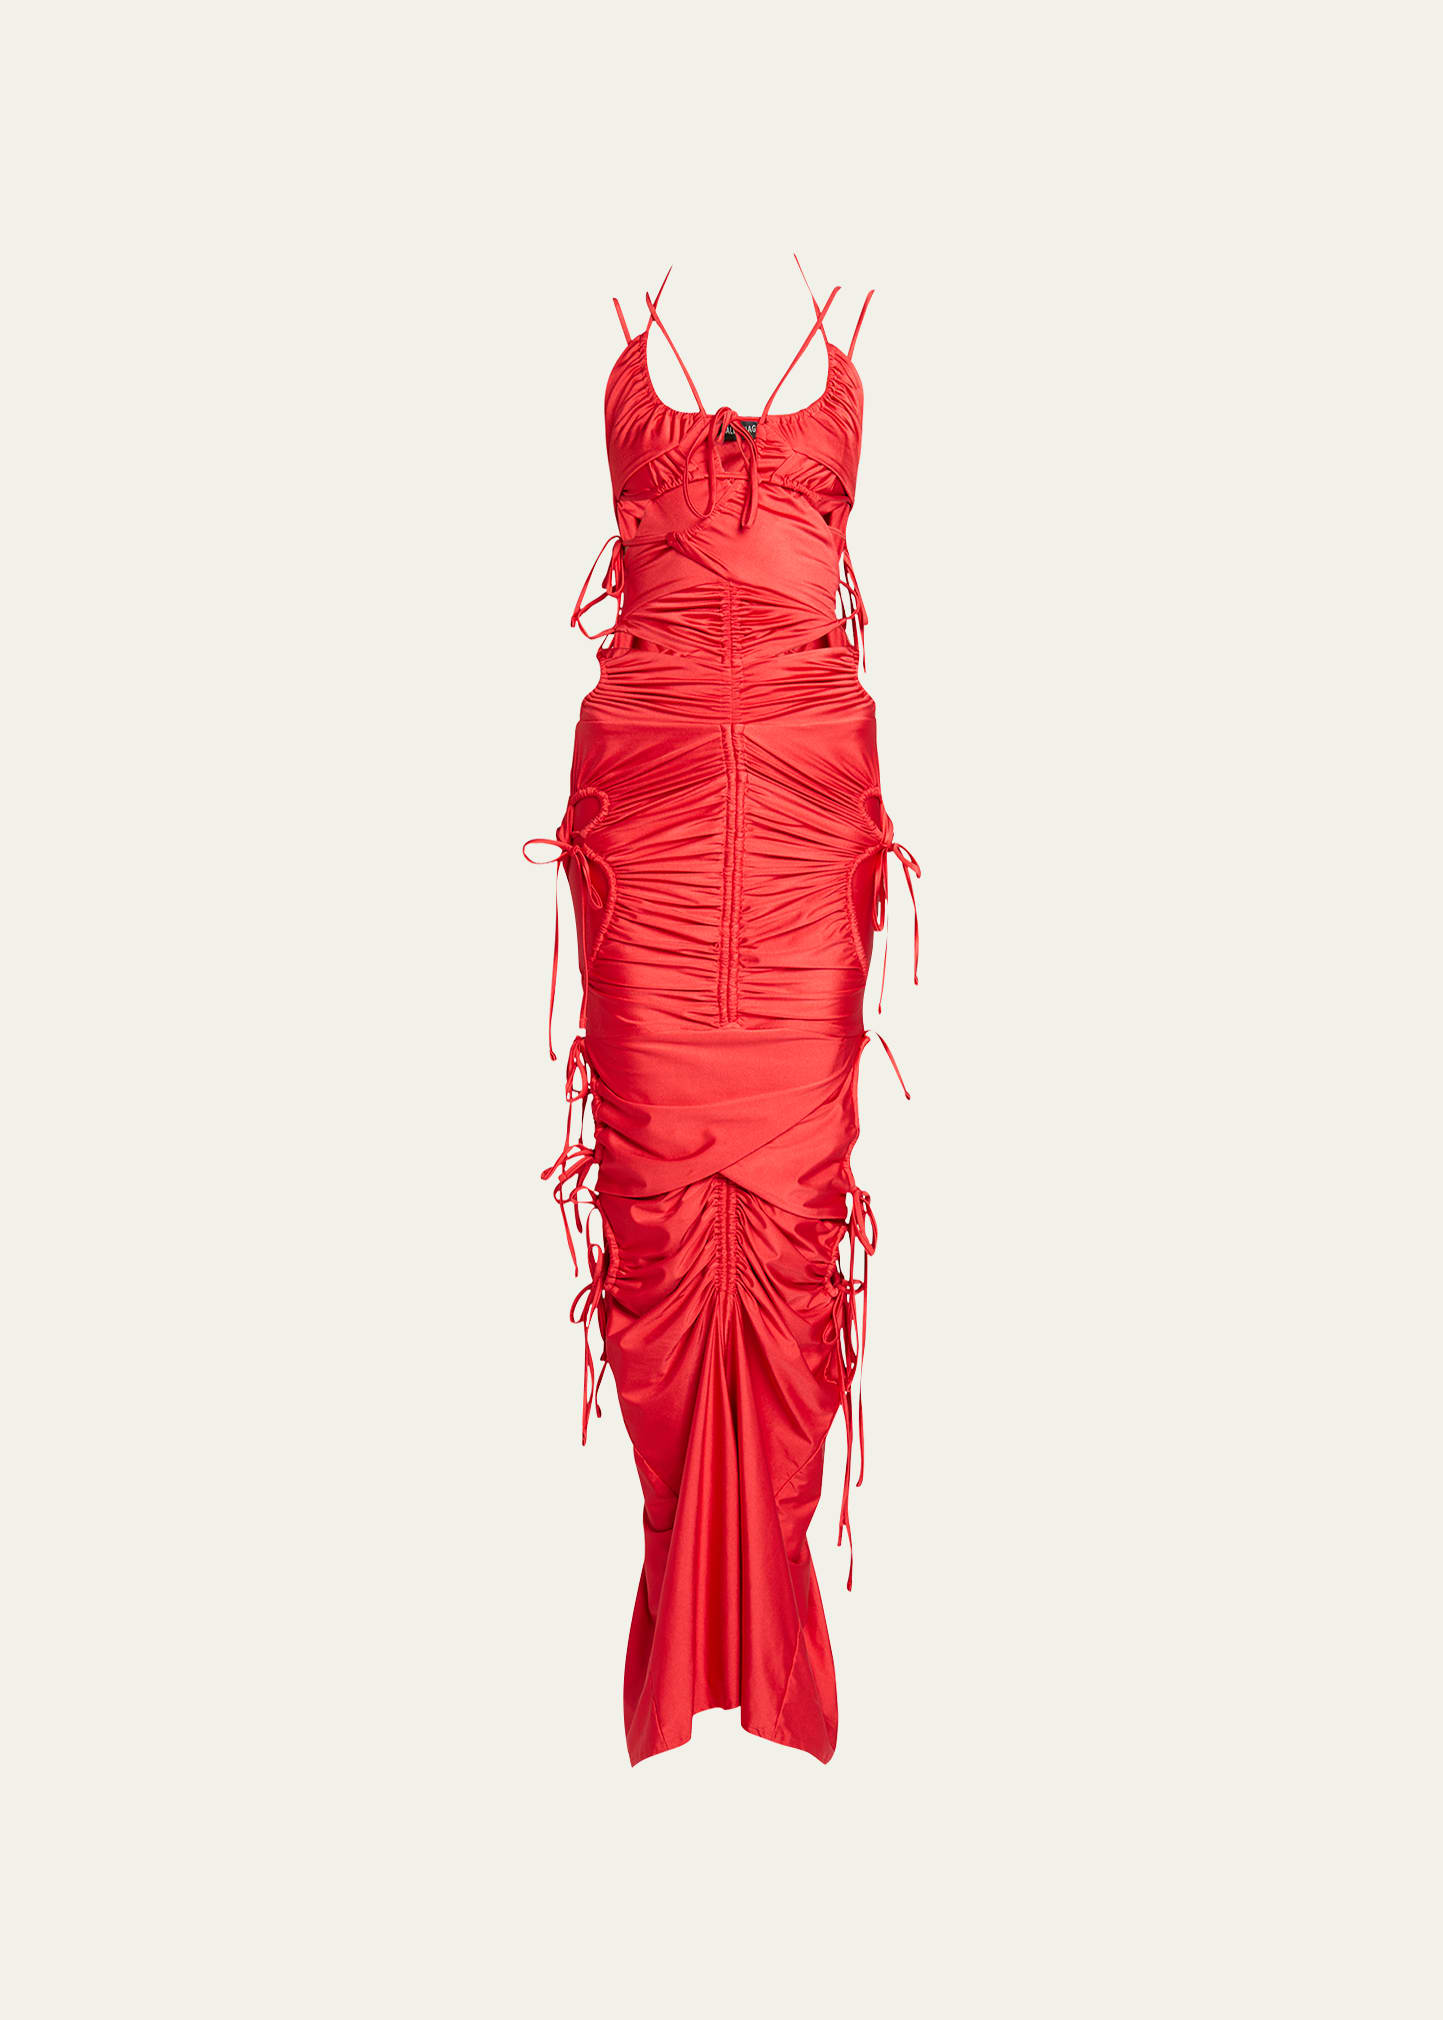 Balenciaga Patched Bikini Dress With Cutout Details In Red